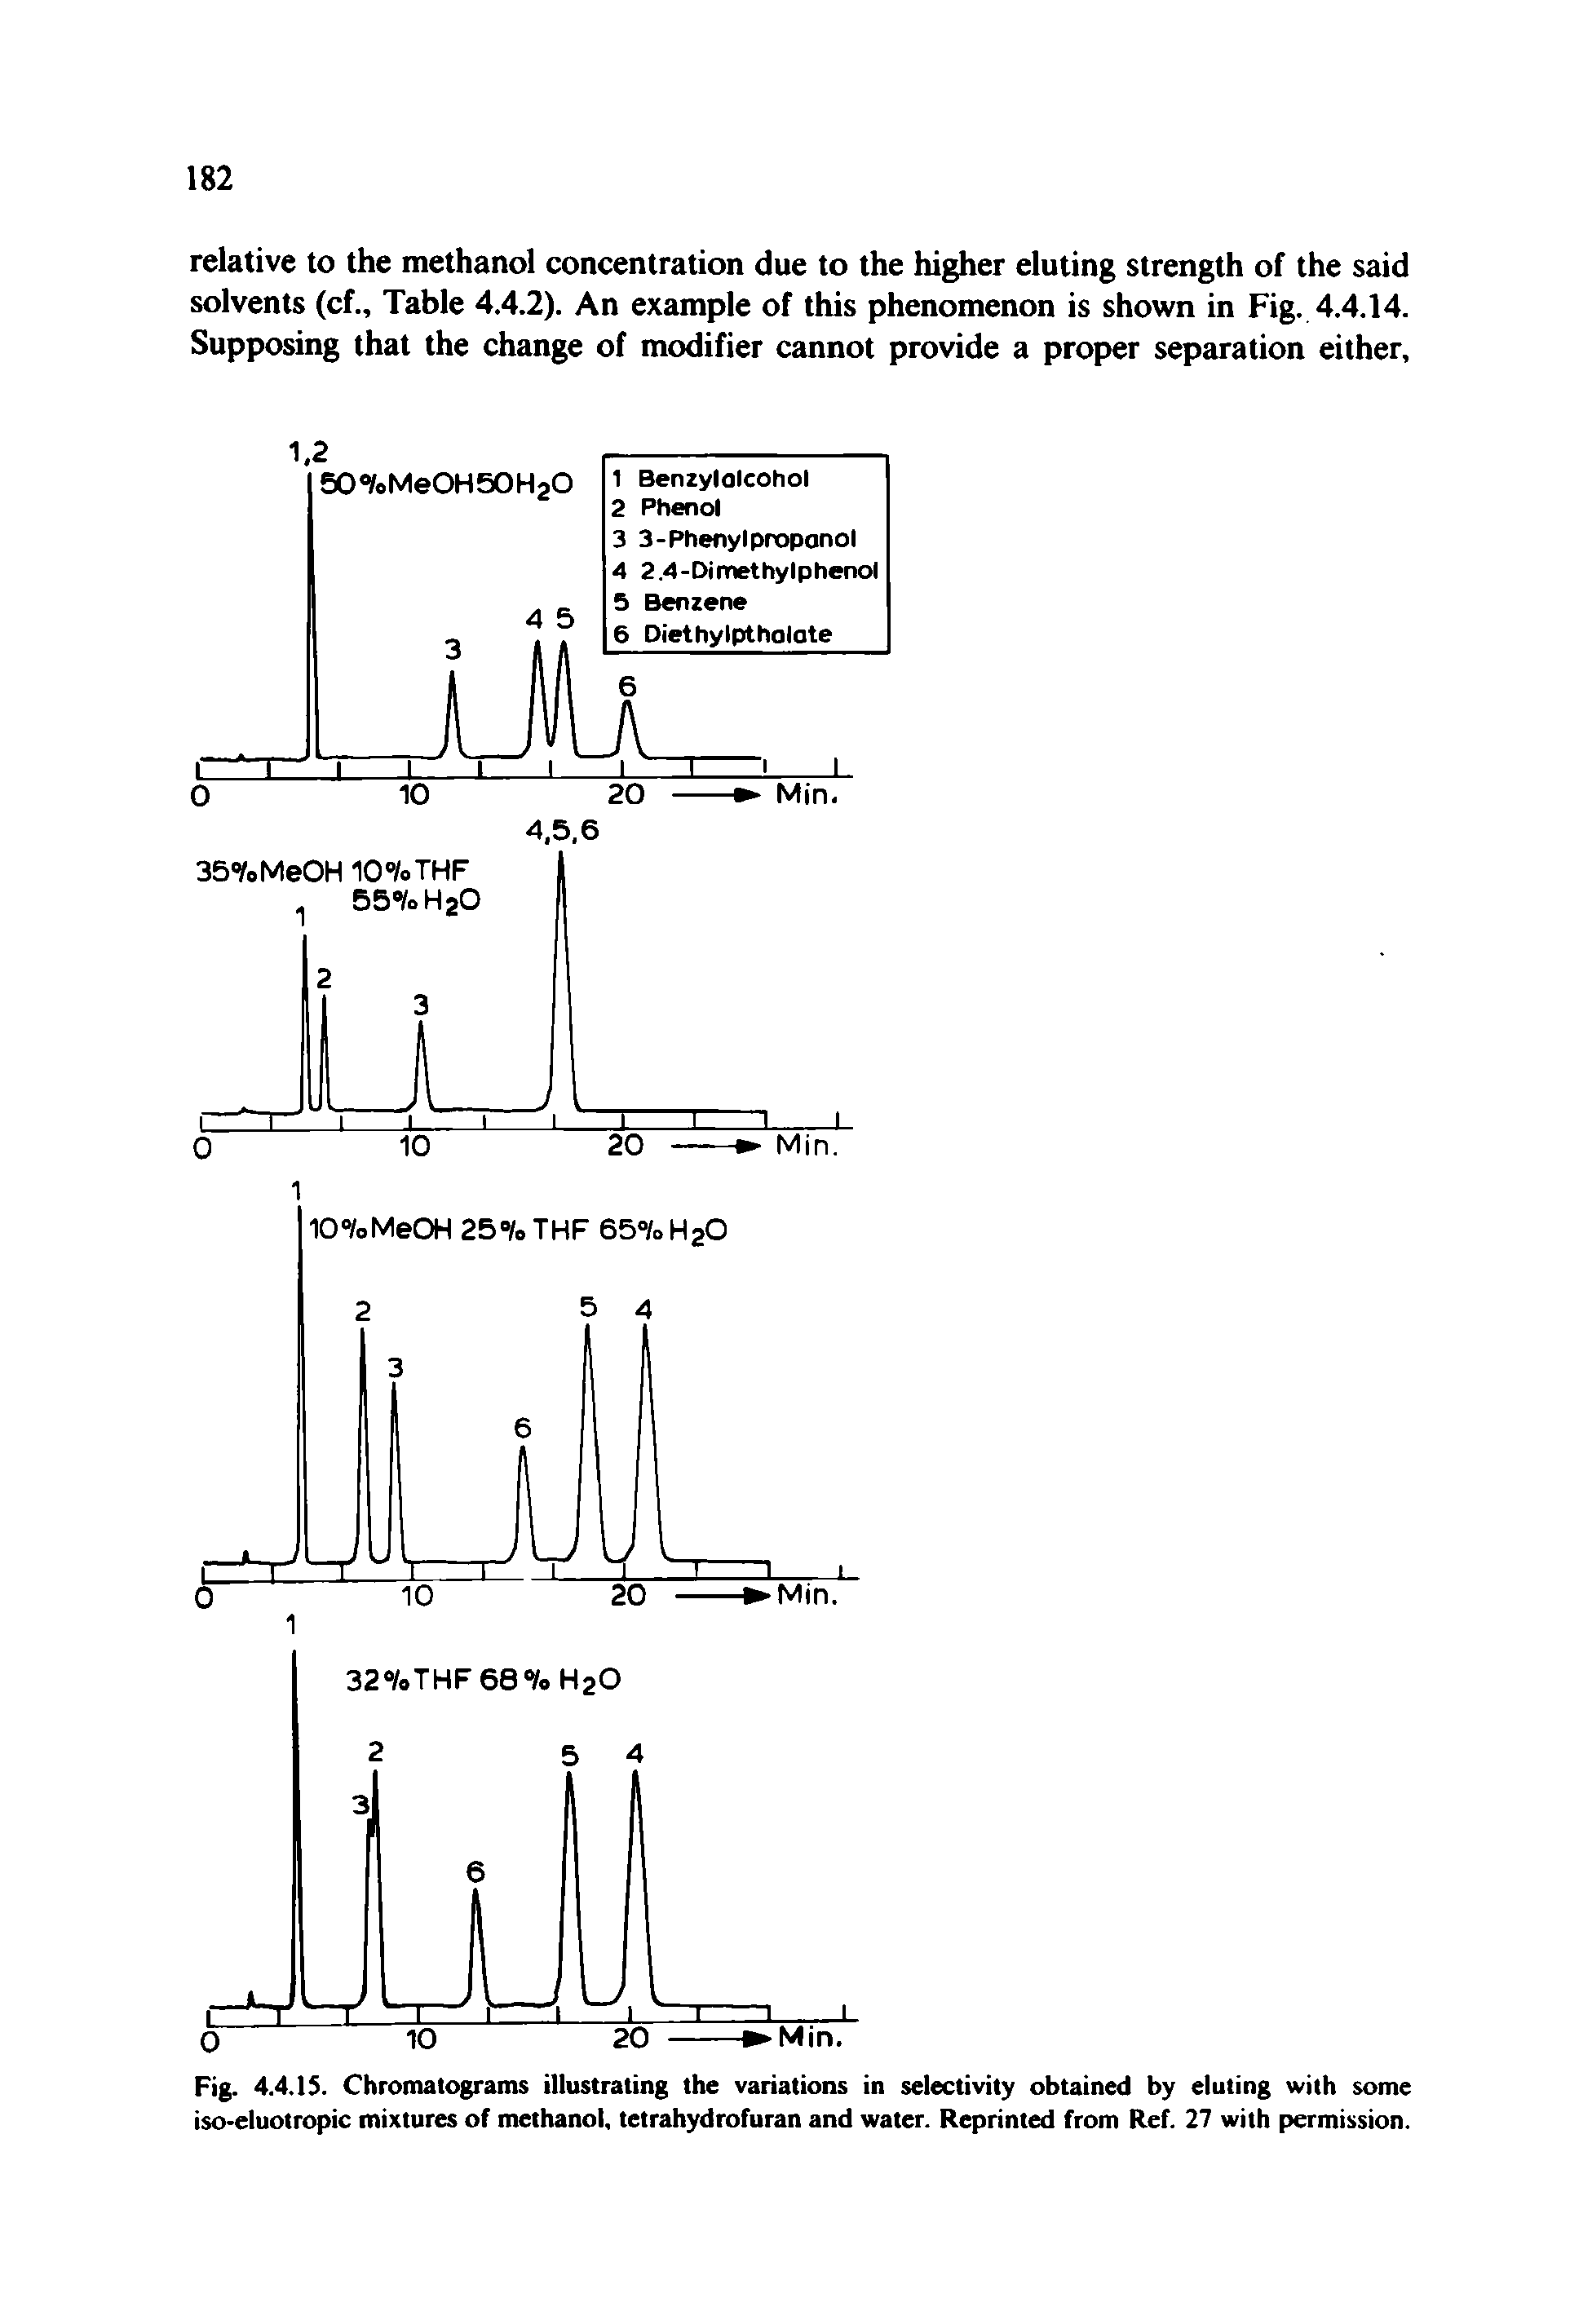 Fig. 4.4.1S. Chromatograms illustrating the variations in selectivity obtained by eluting with some iso-eluotropic mixtures of methanol, tetrahydrofuran and water. Reprinted from Ref. 27 with permission.